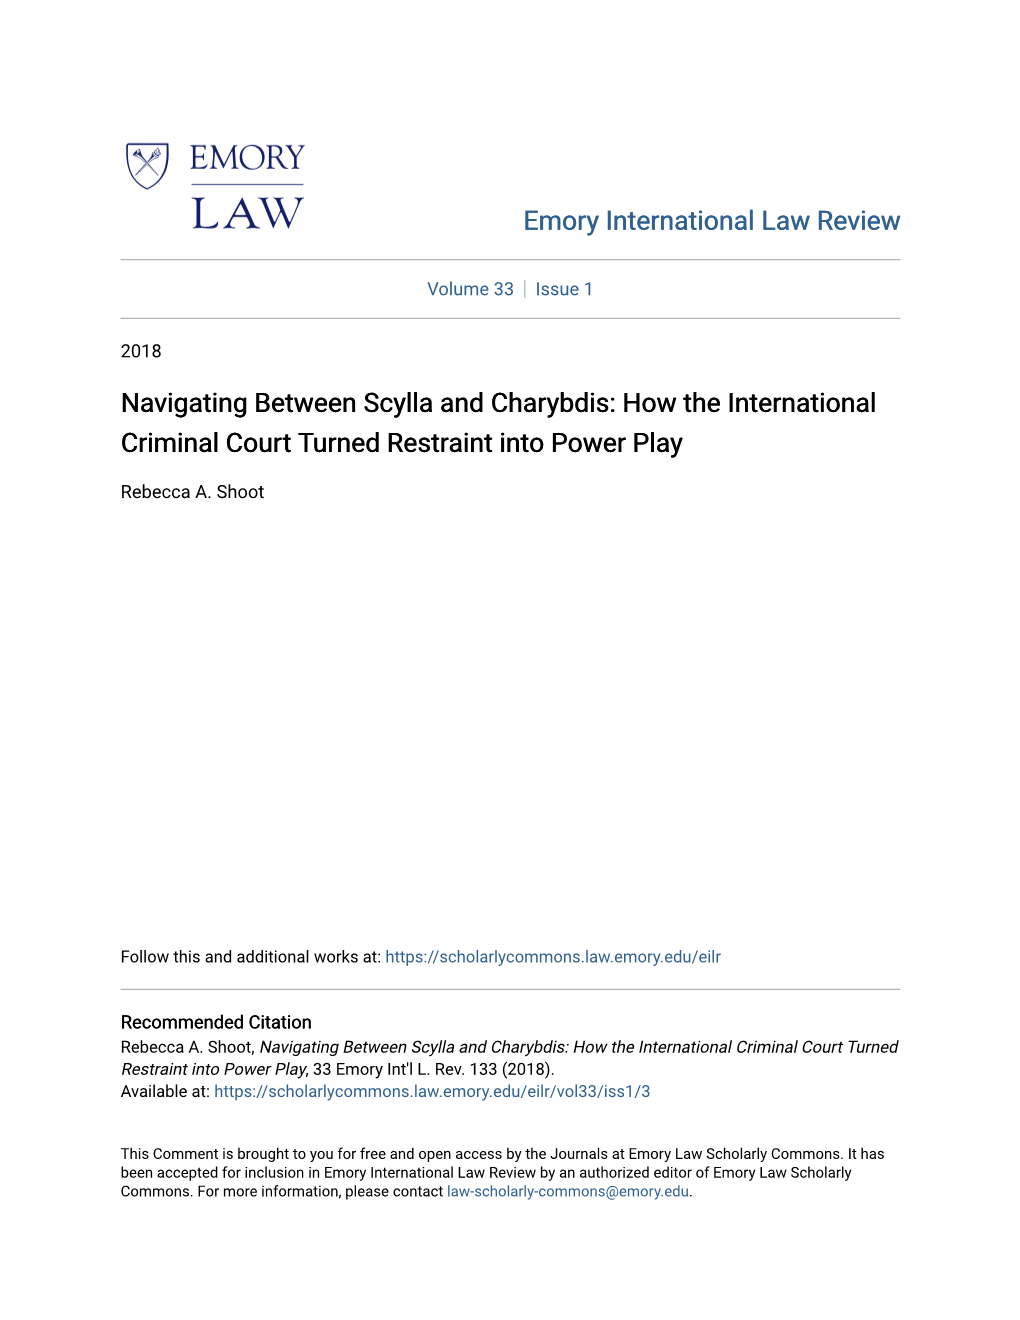 Navigating Between Scylla and Charybdis: How the International Criminal Court Turned Restraint Into Power Play